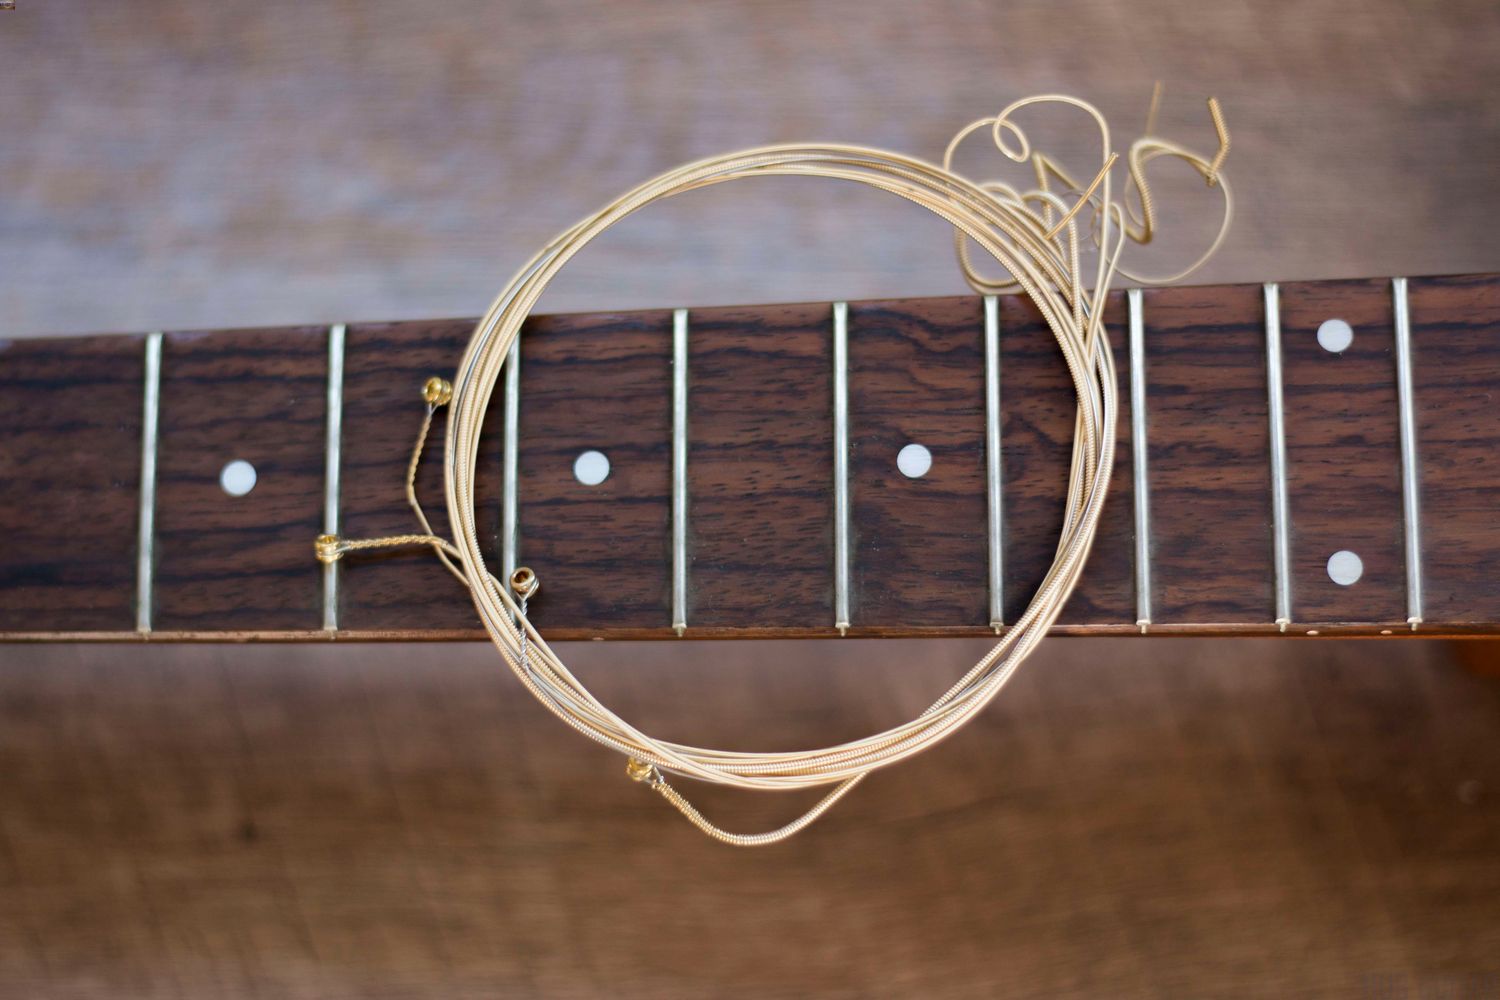 What To Do With Old Guitar Strings